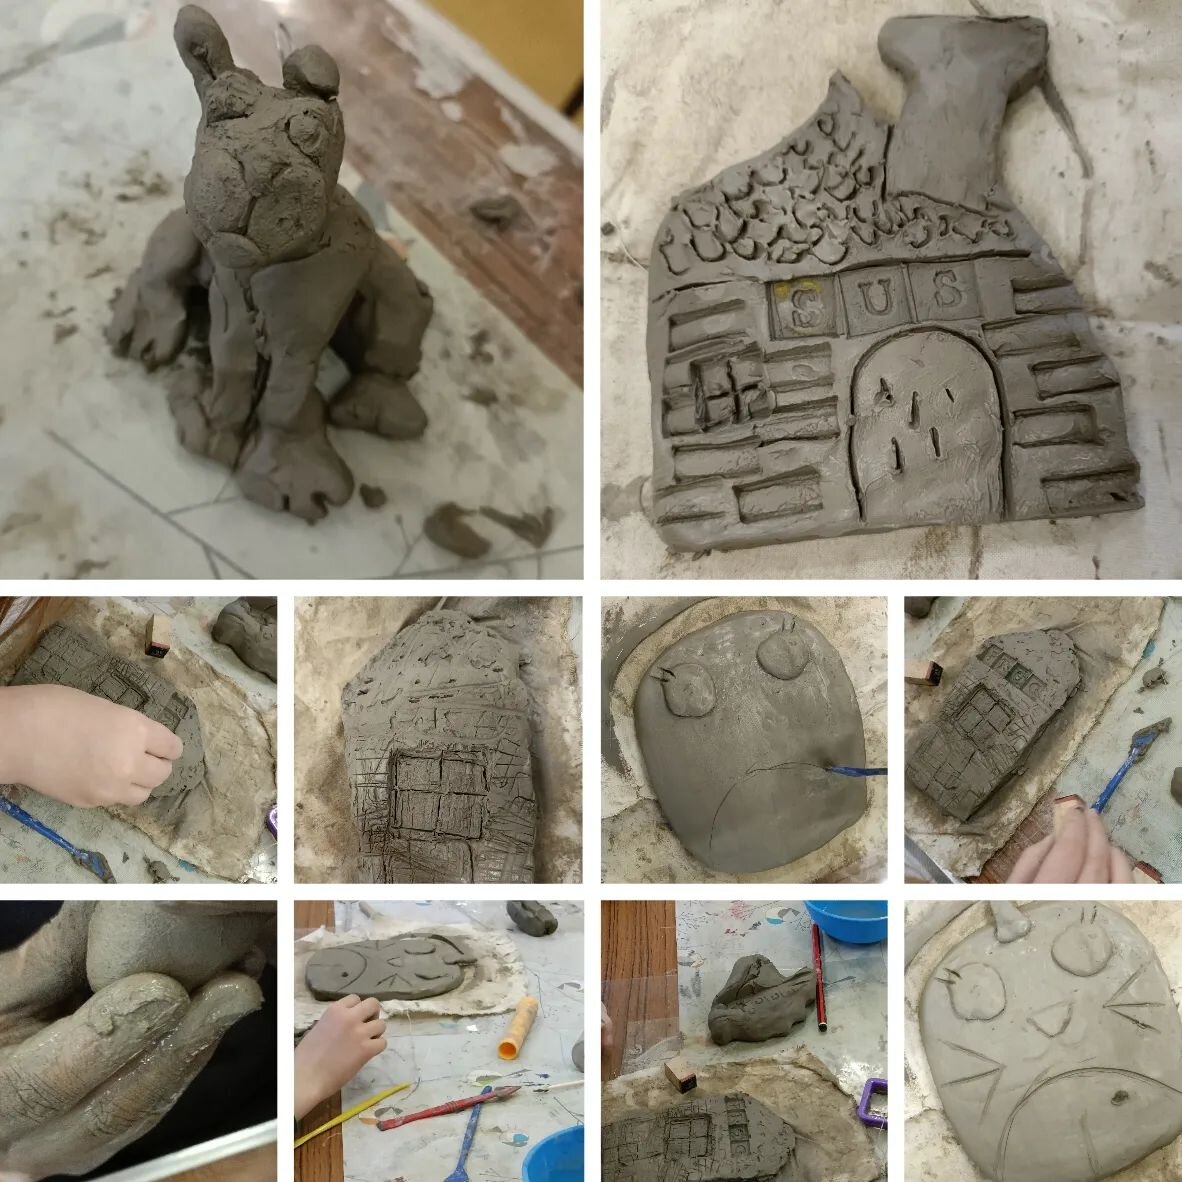 Clay week.🙂

Bookings are open  for our spring term Wednesday after school class in Seaford. DM for details 🙂

#houses #kidsclay #clayforkids #crowds  #seafordkids #artforkids #artykidsclub #artclub #seaford #whatsonseaford